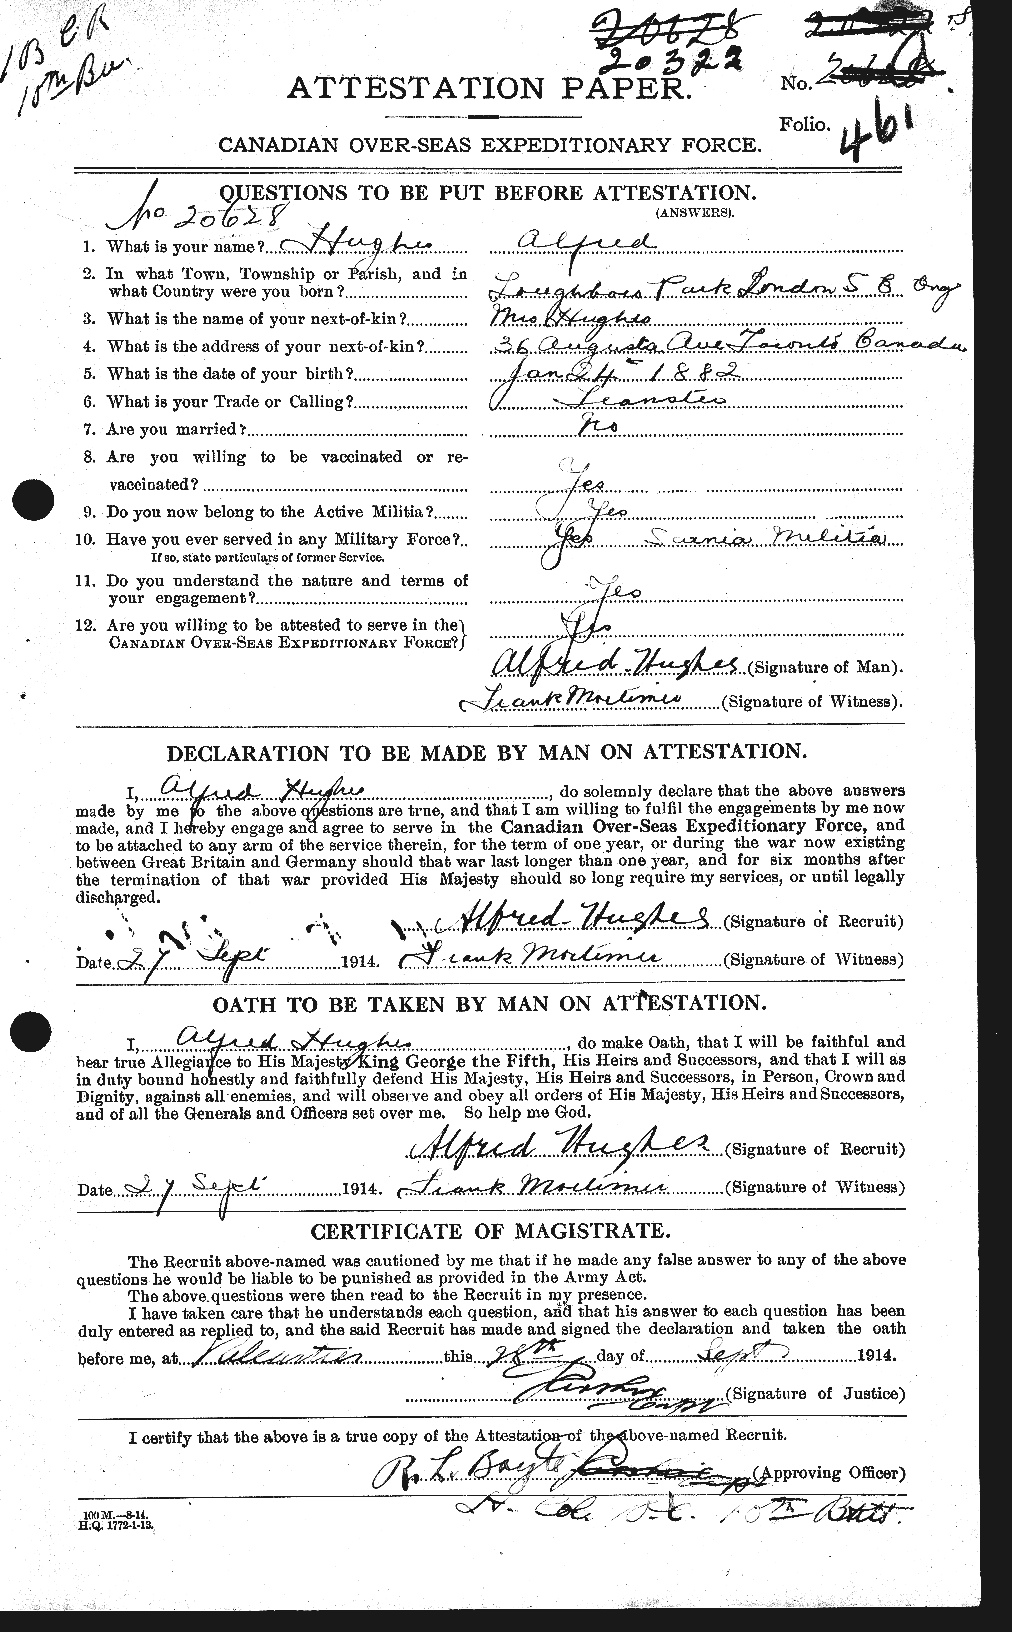 Personnel Records of the First World War - CEF 402535a